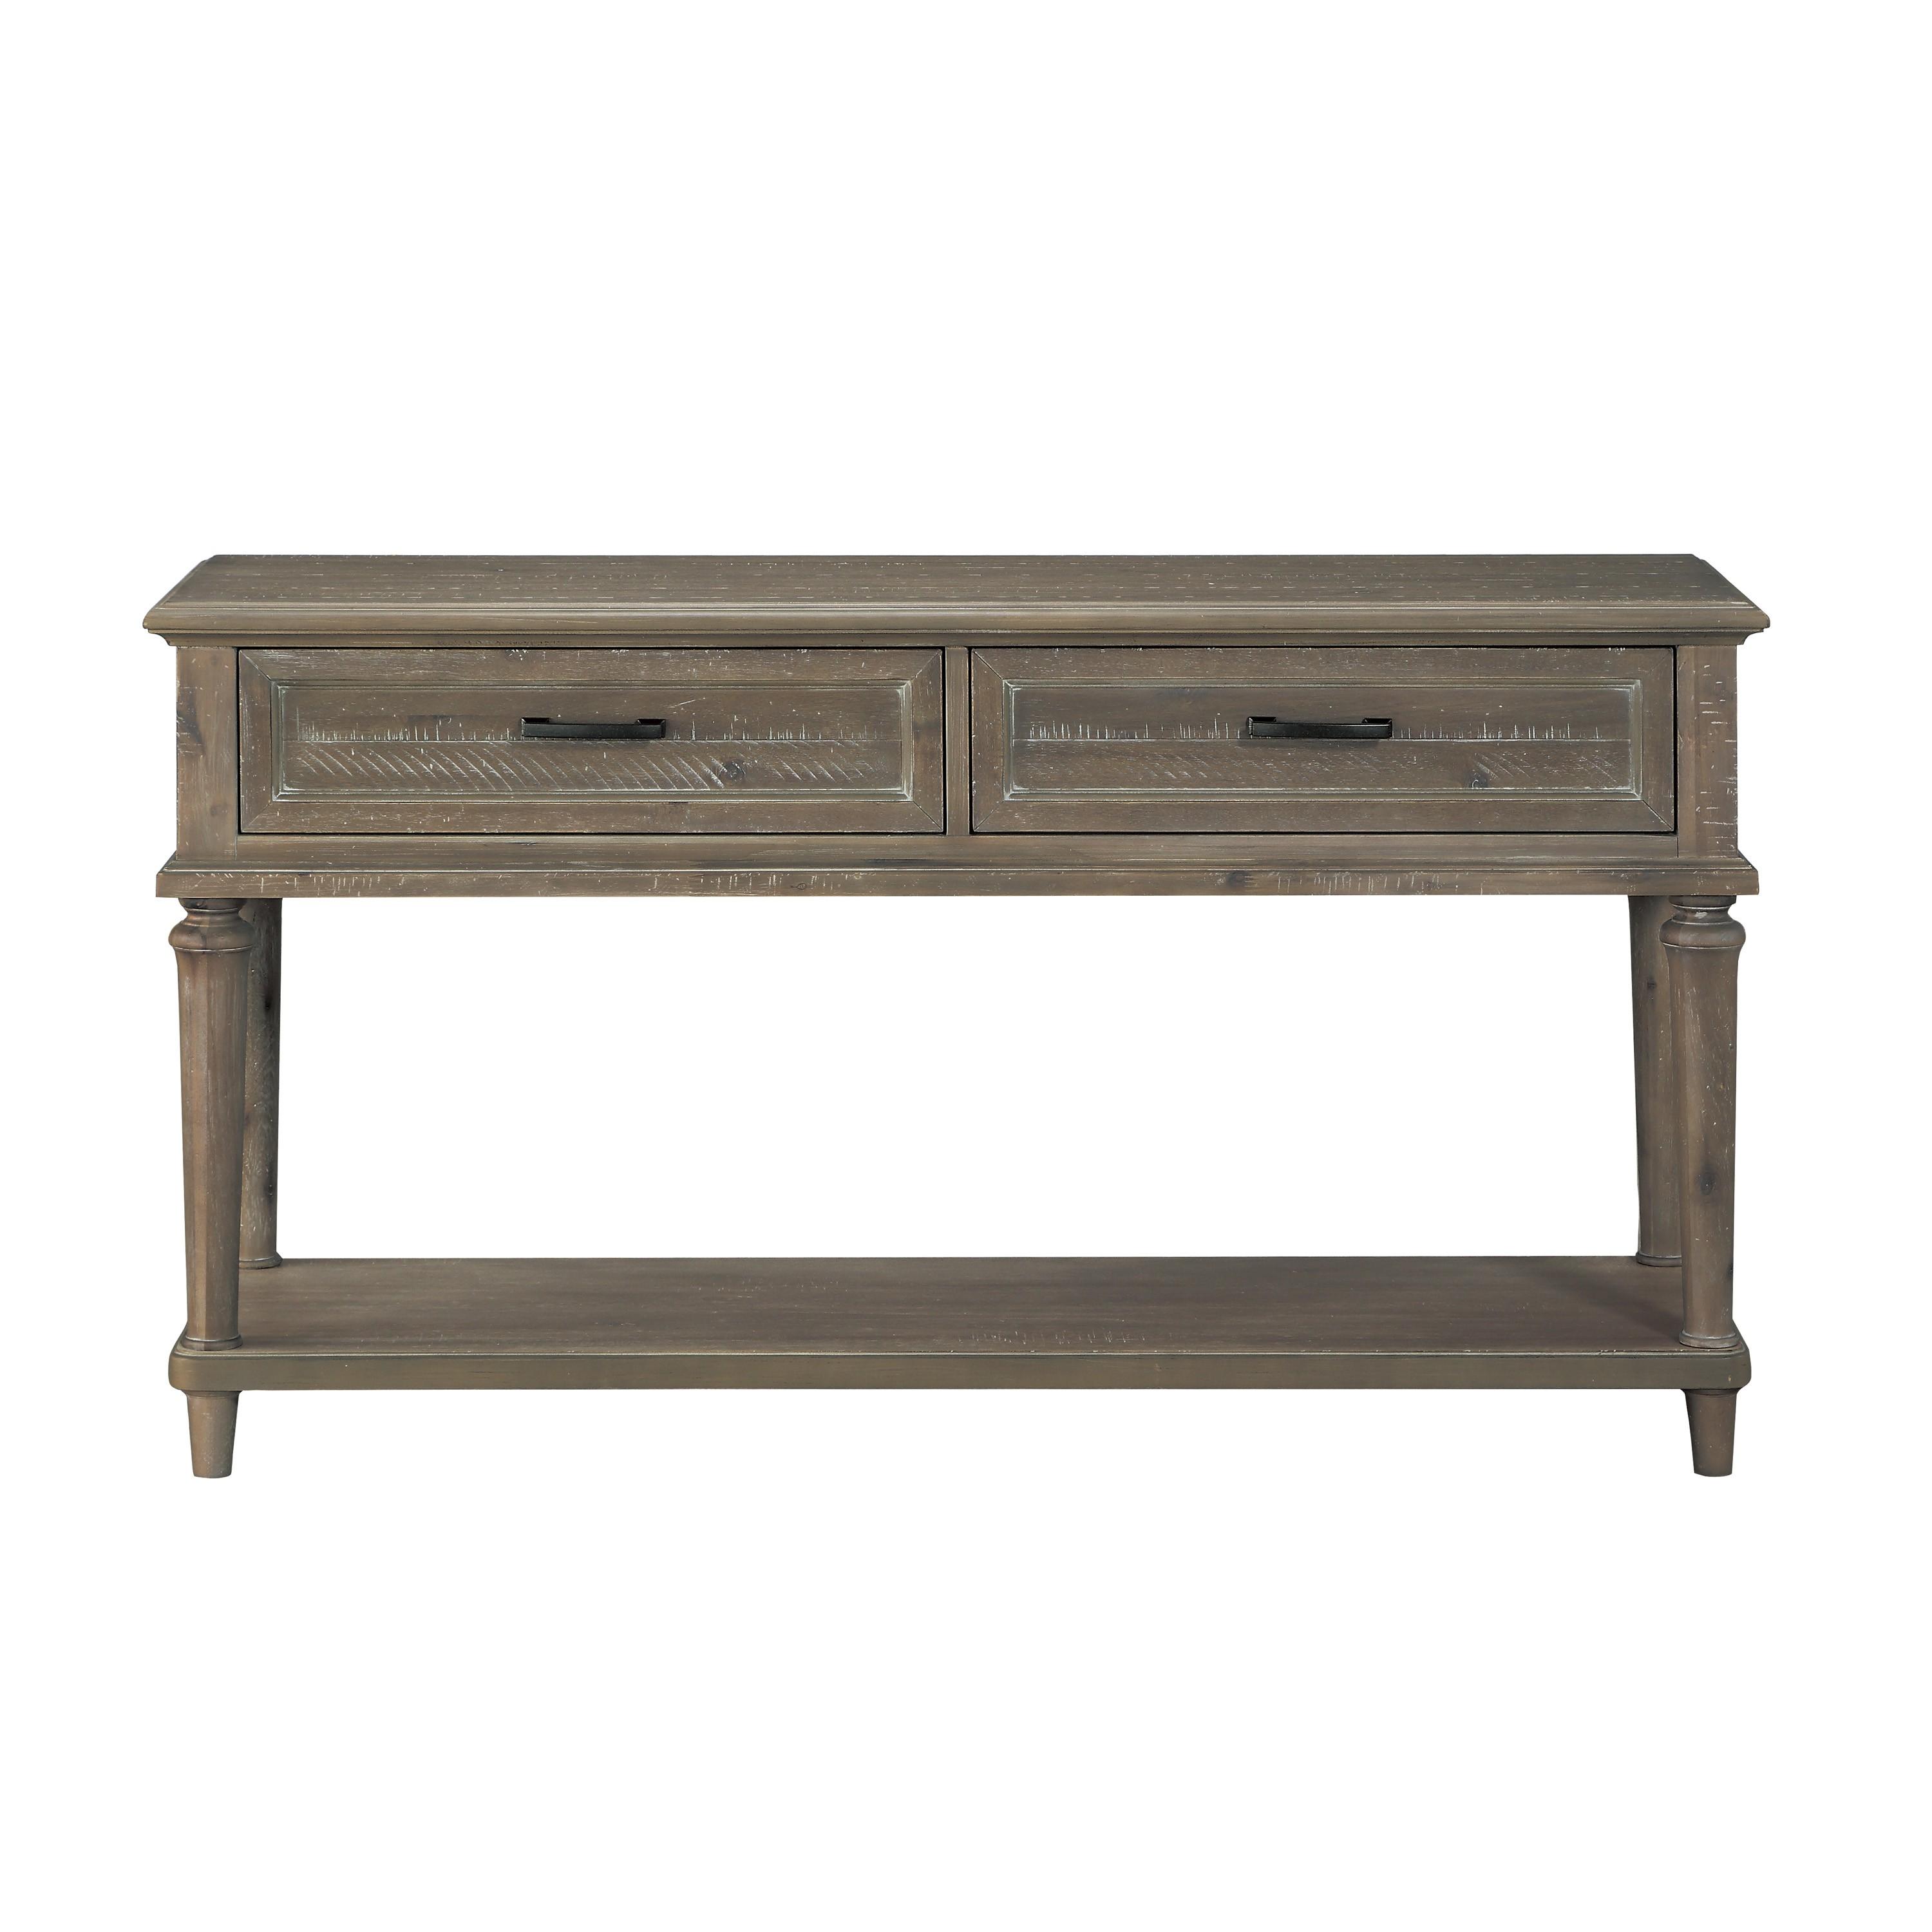 Transitional Sofa Table 1689BR-05 Cardano 1689BR-05 in Light Brown 